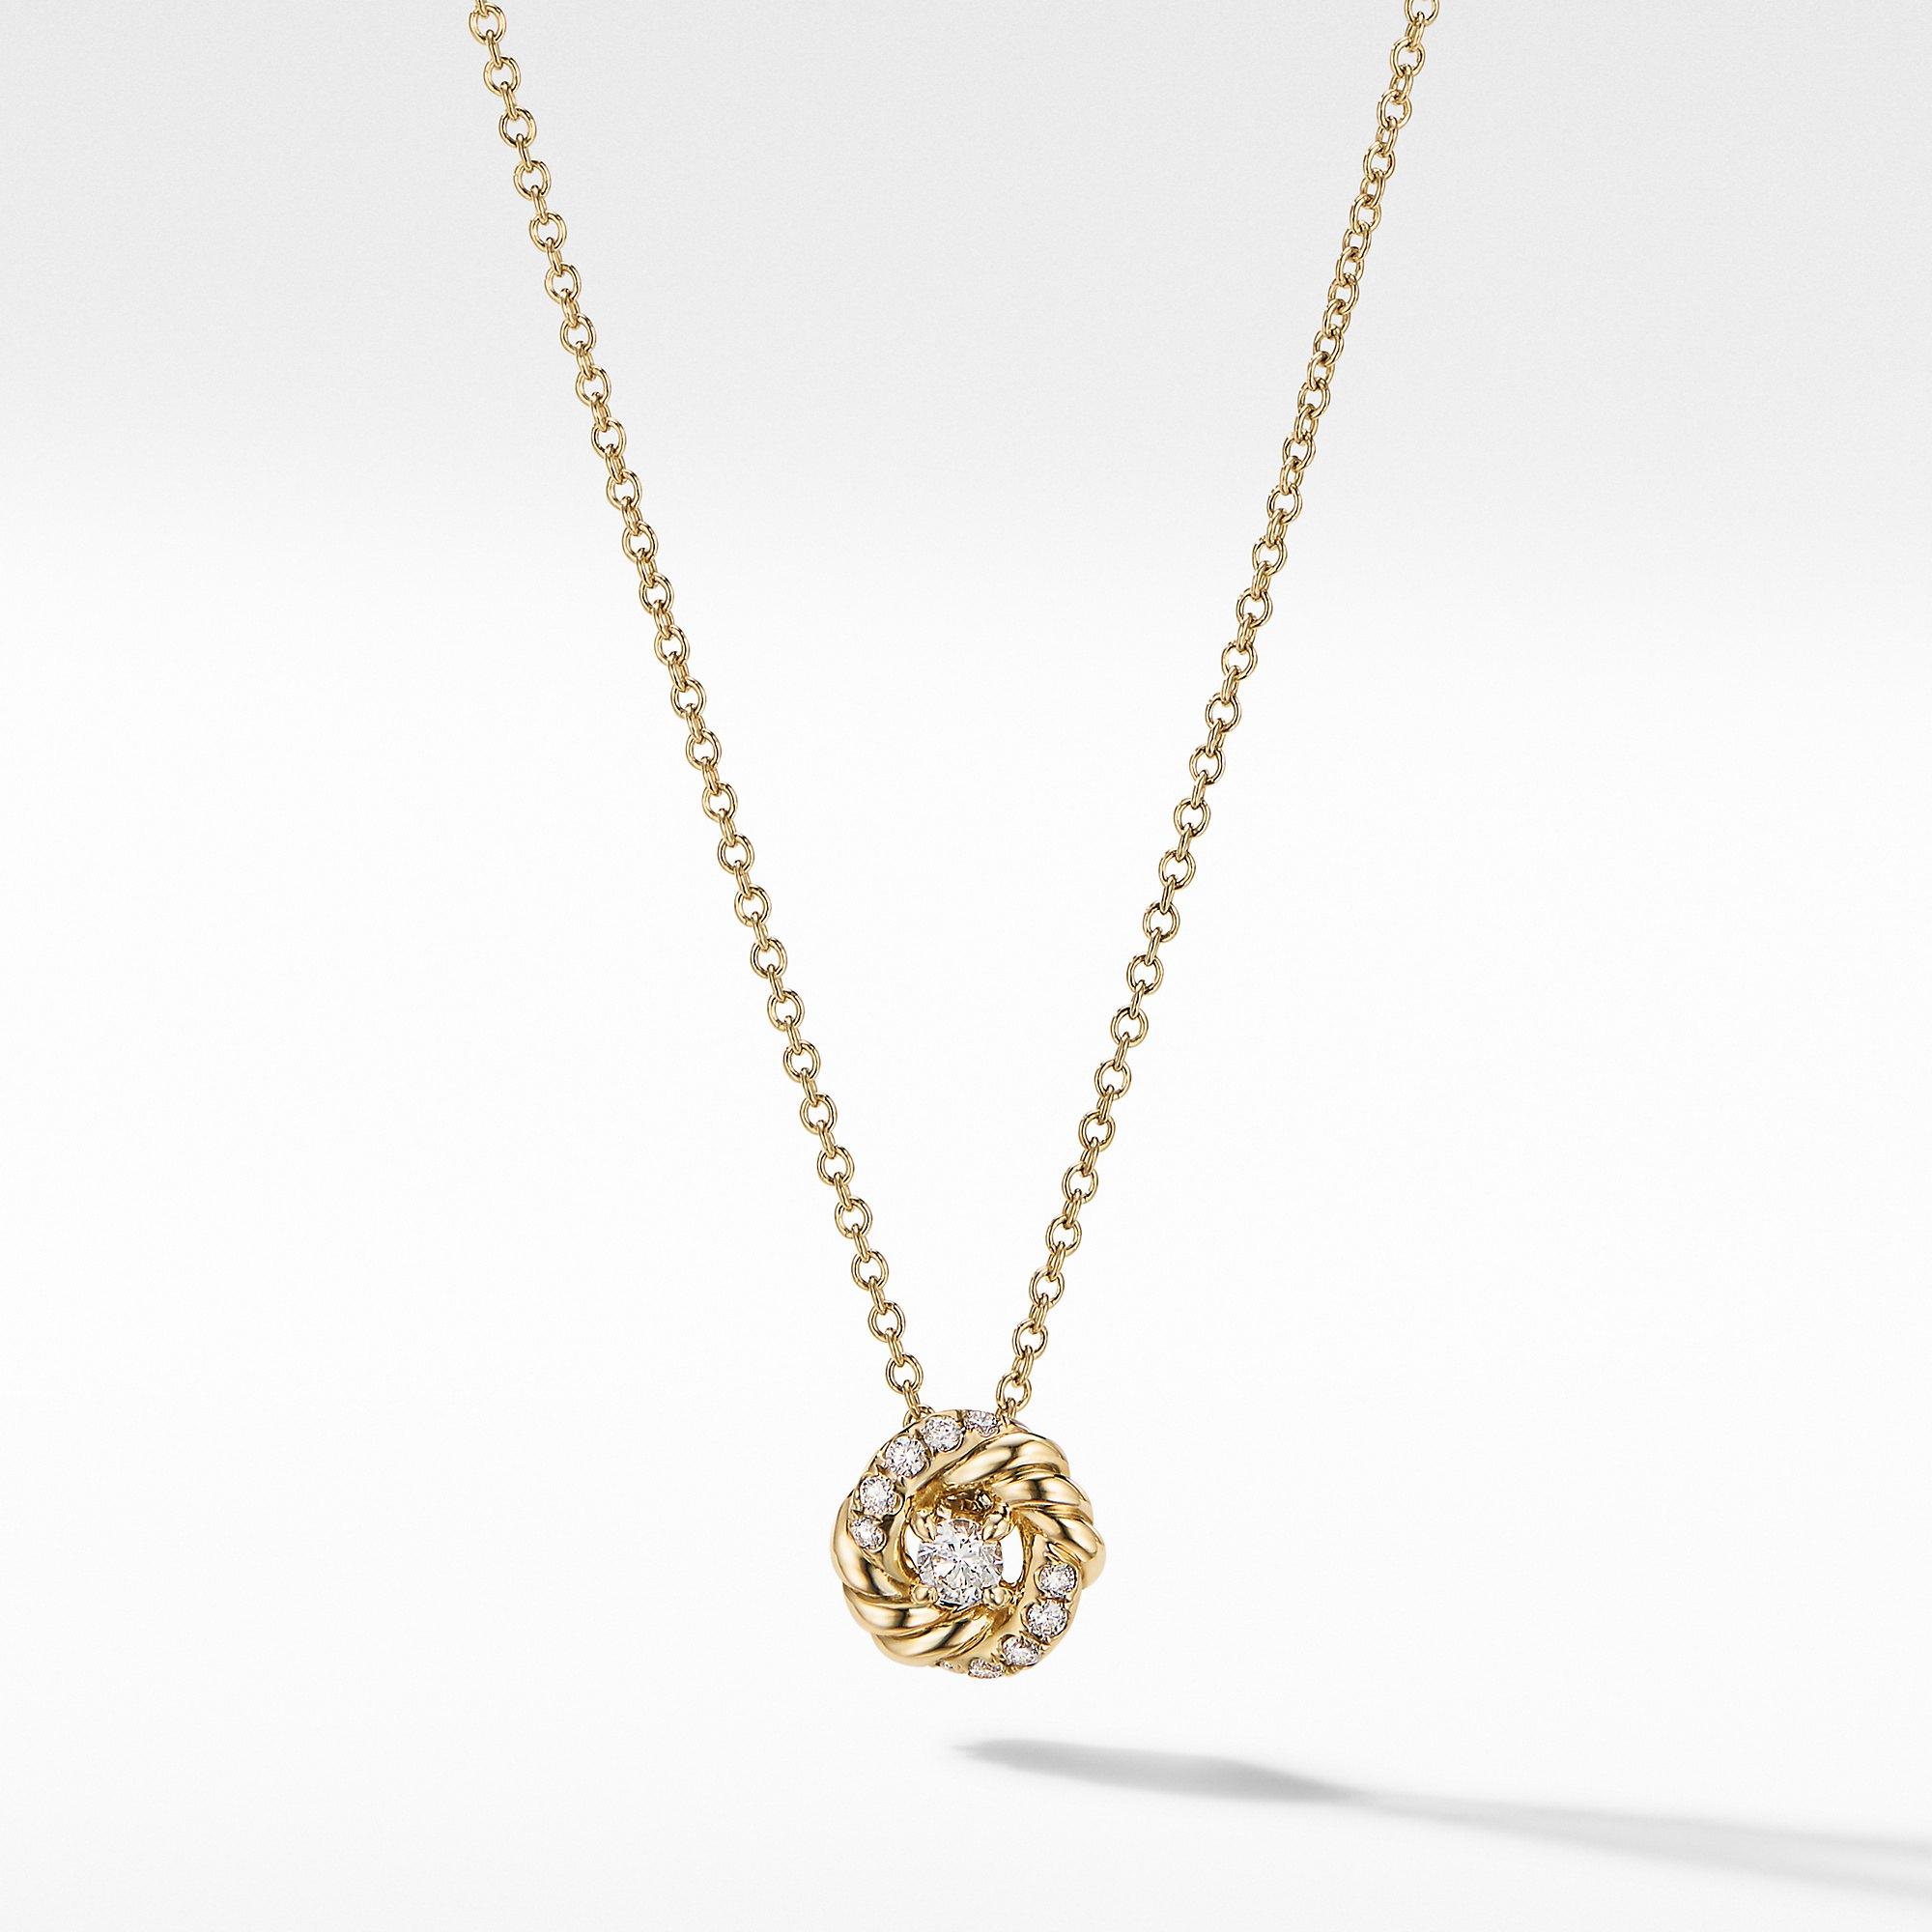 David Yurman Petite Infinity Cluster Pendant Necklace in Yellow Gold with Diamonds